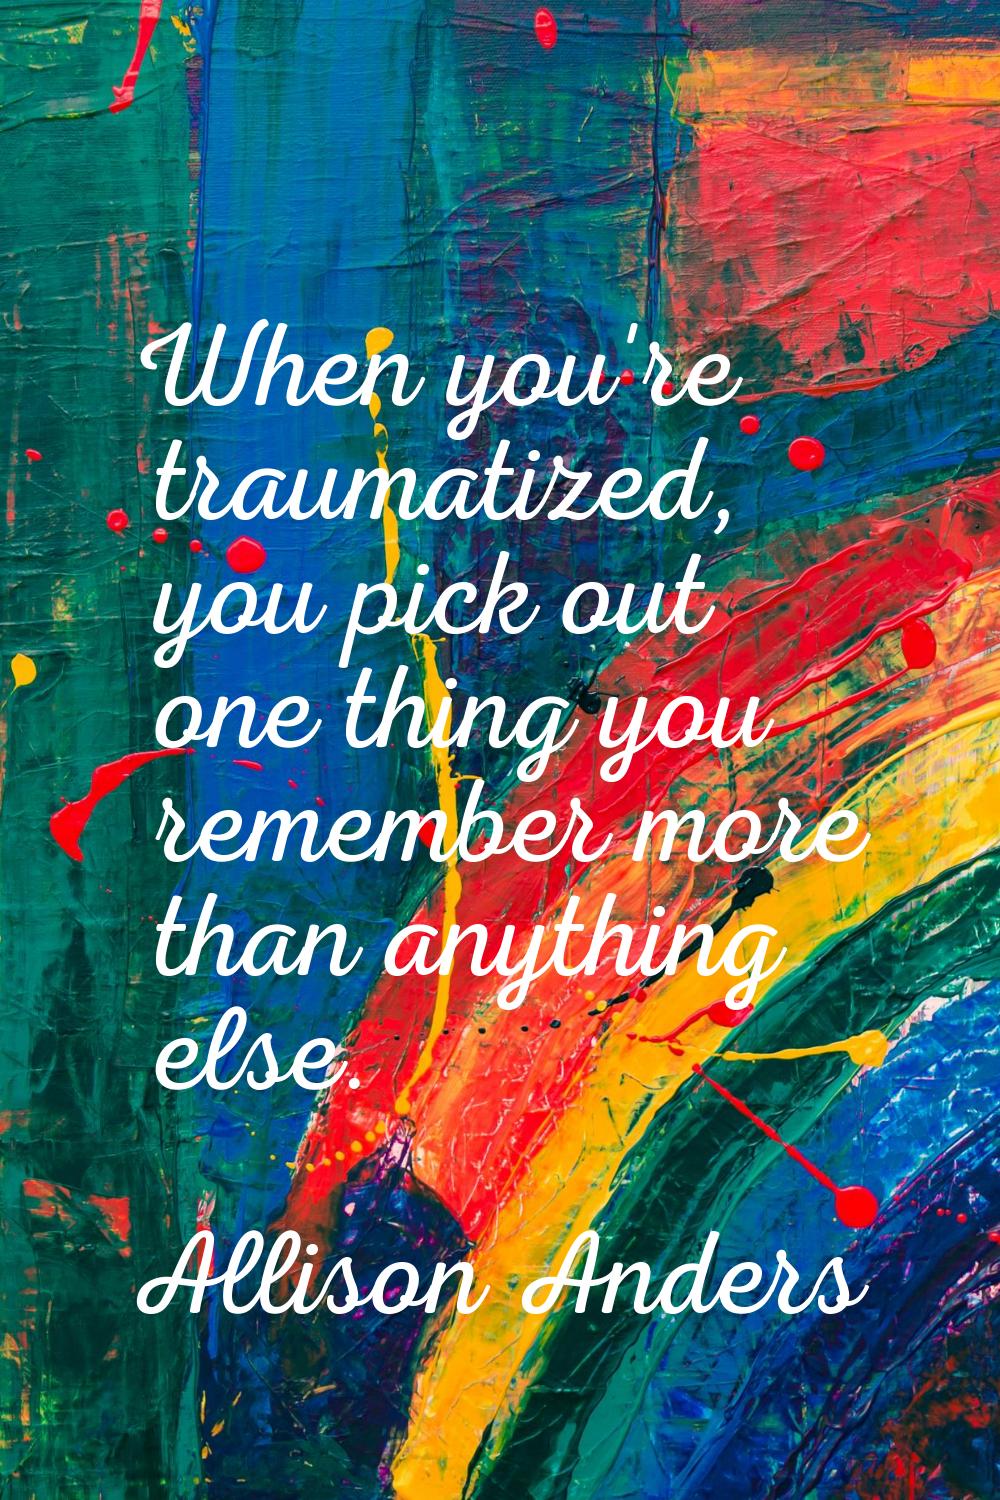 When you're traumatized, you pick out one thing you remember more than anything else.